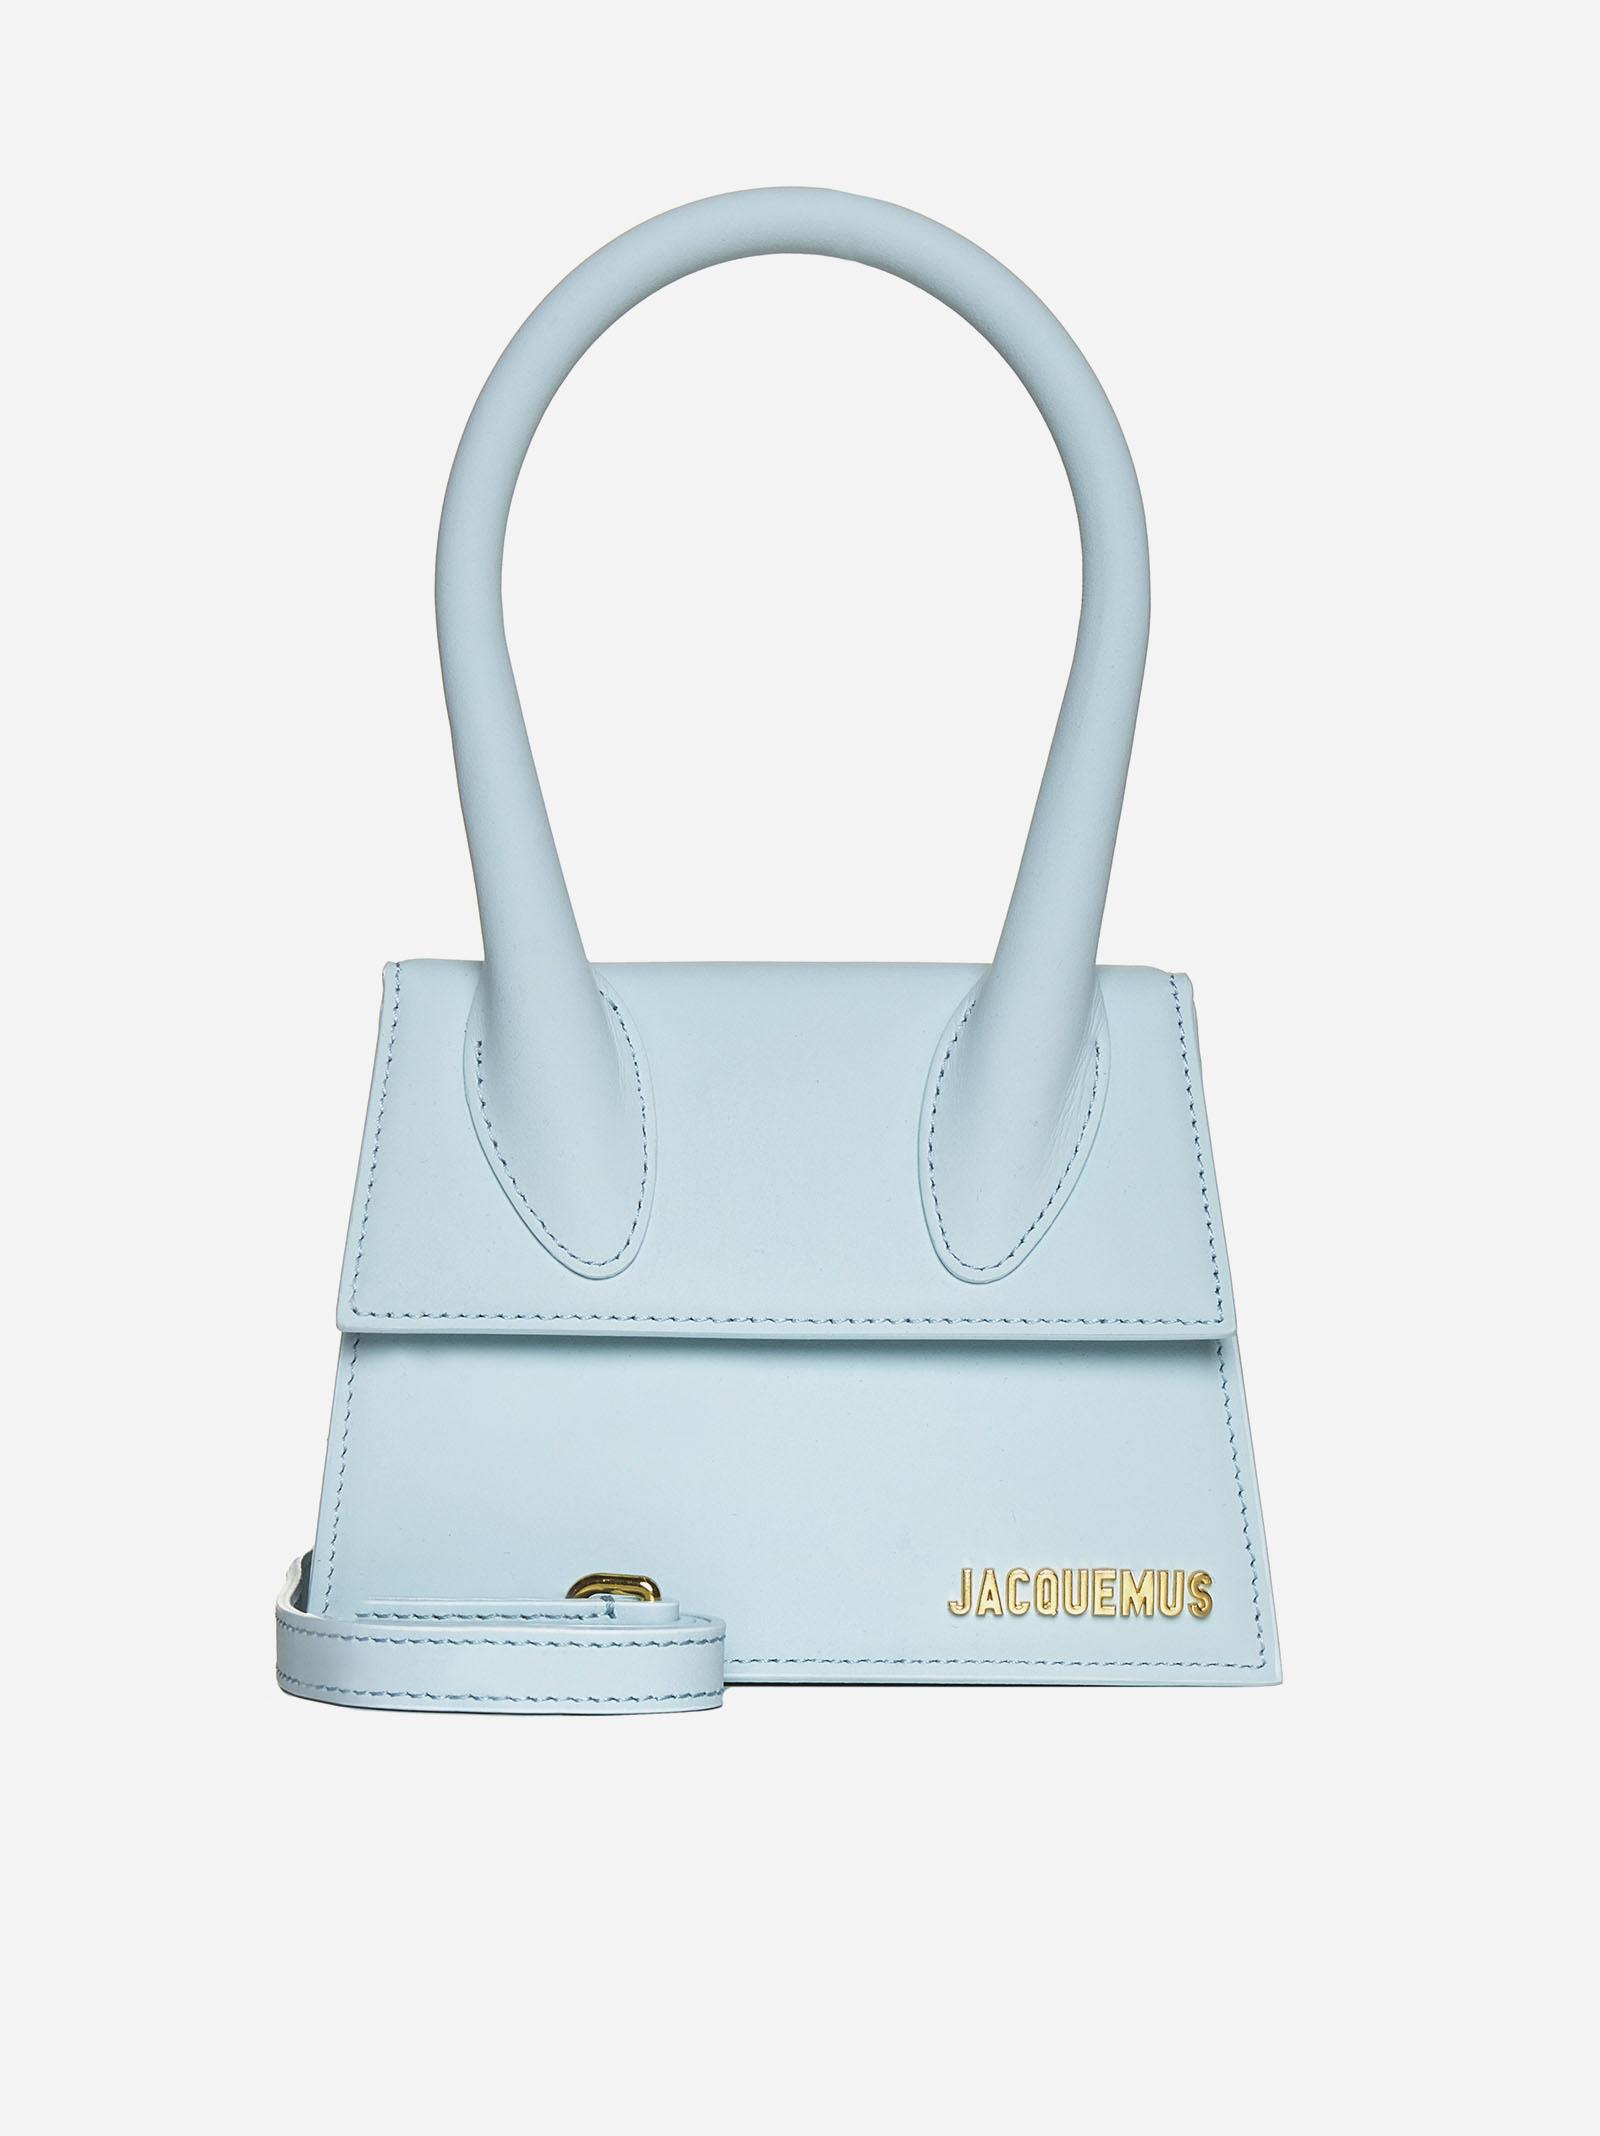 Jacquemus Le Chiquito Moyen Leather Bag in Blue | Lyst